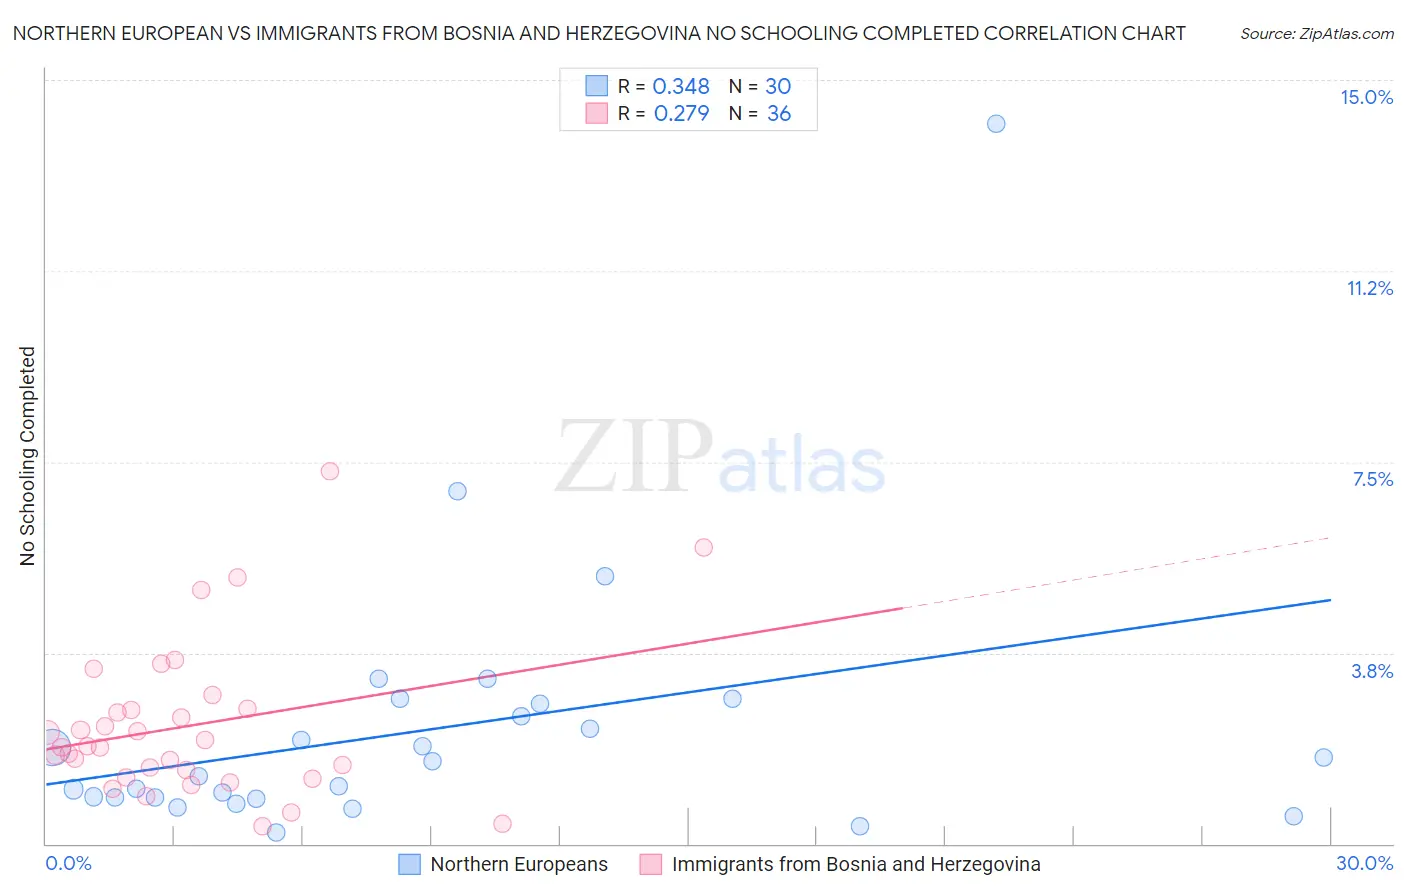 Northern European vs Immigrants from Bosnia and Herzegovina No Schooling Completed